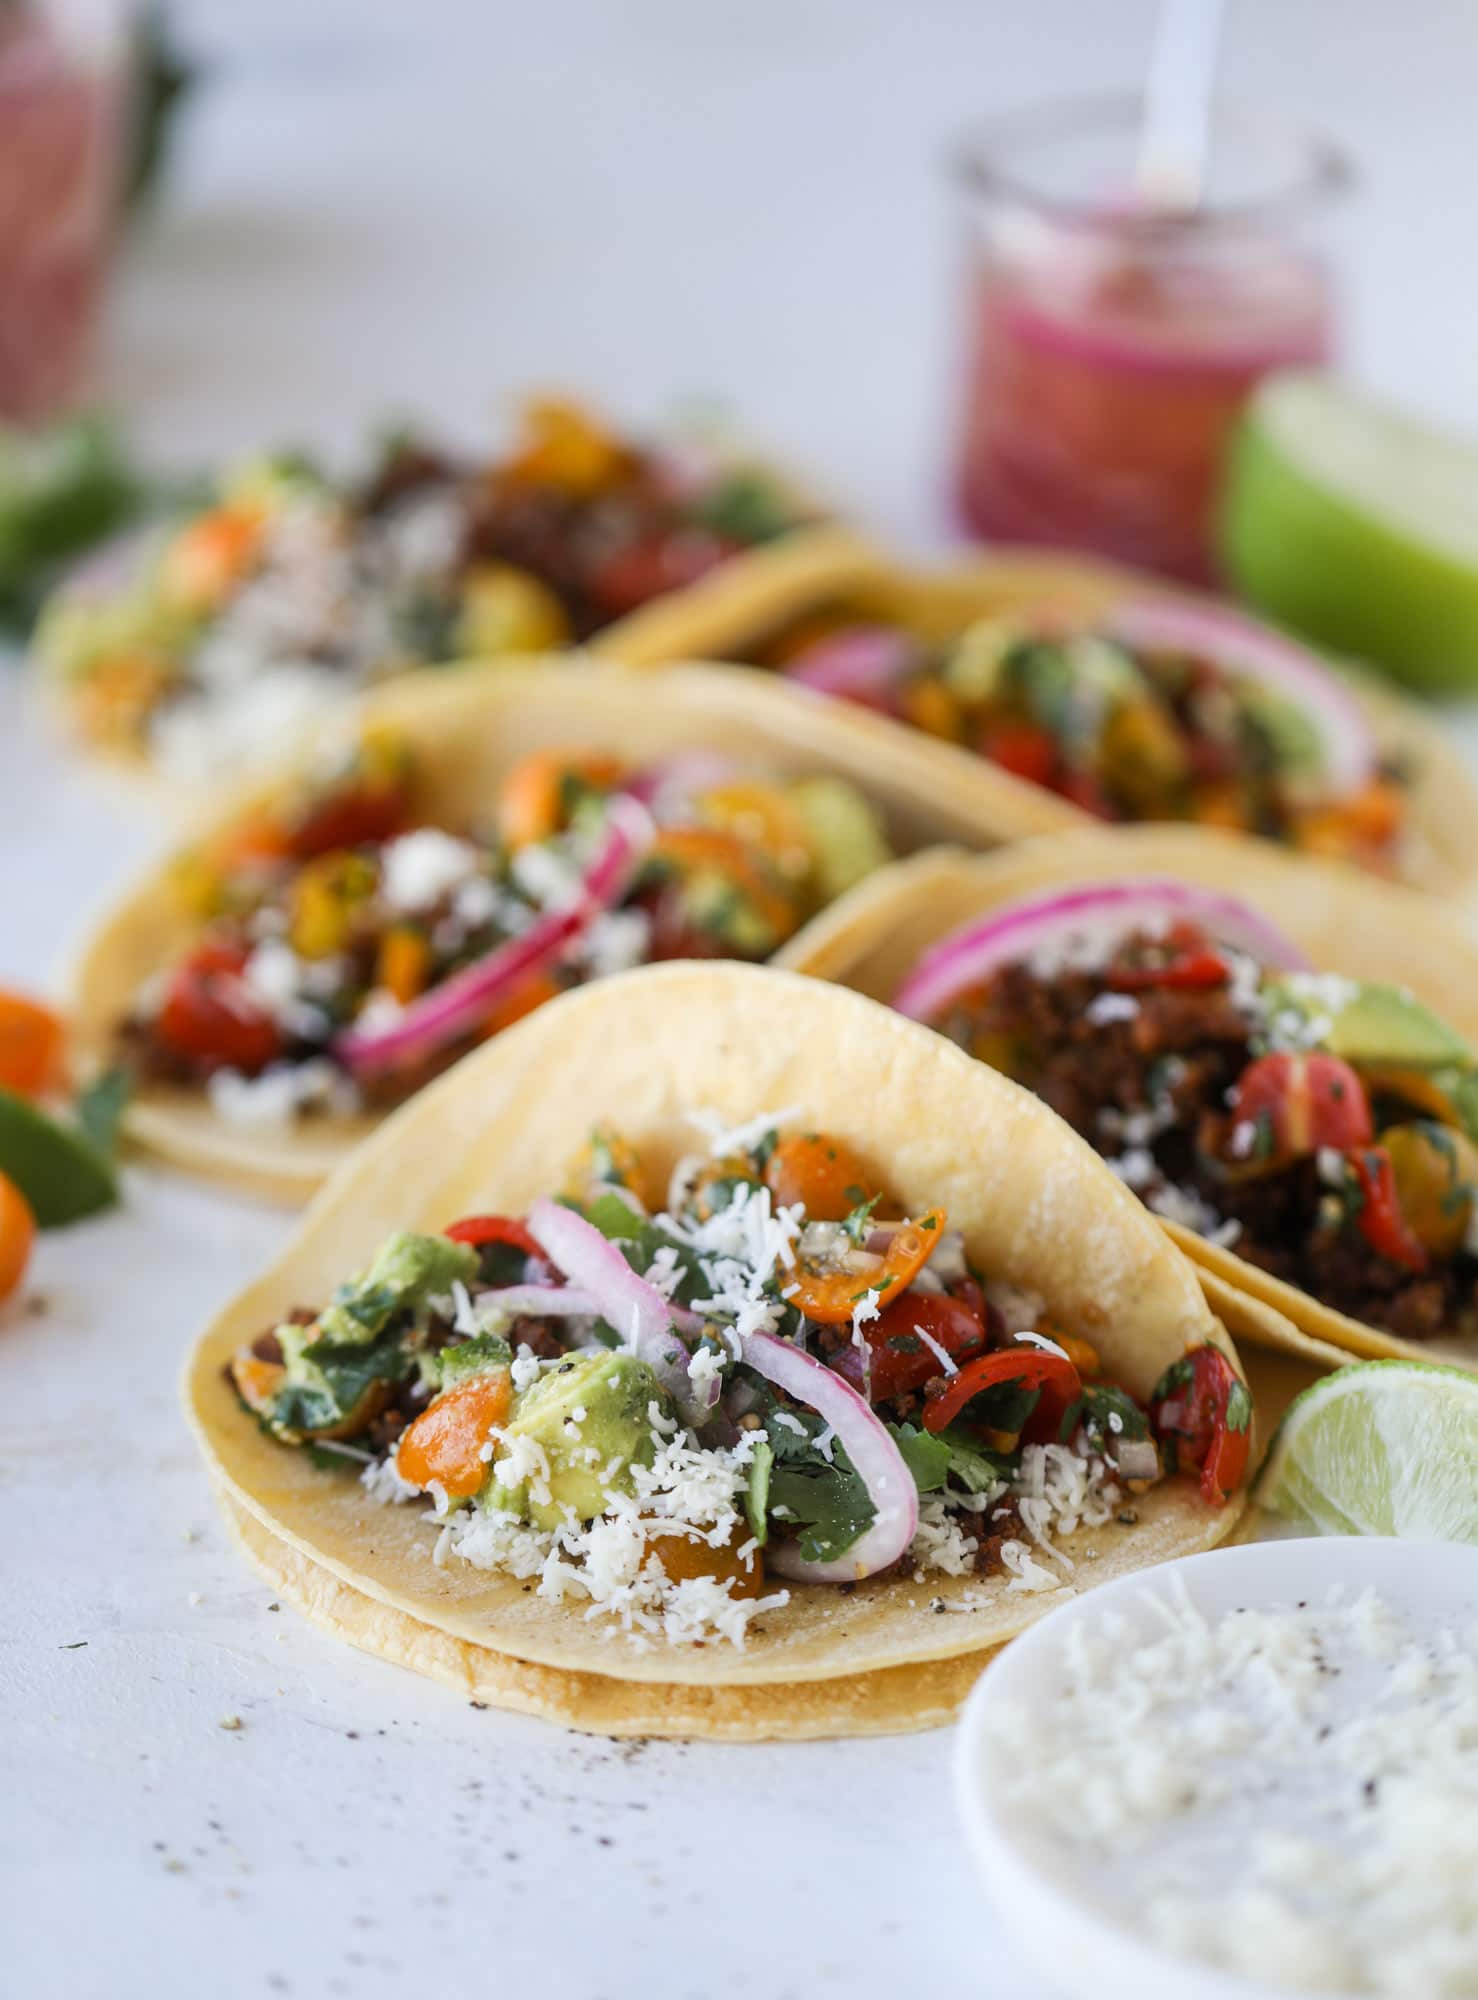 Weeknight ground beef tacos that are anything like the 90s! These are made with a homemade taco seasoning and served with the perfect toppings! I howsweeteats.com #groundbeef #tacos